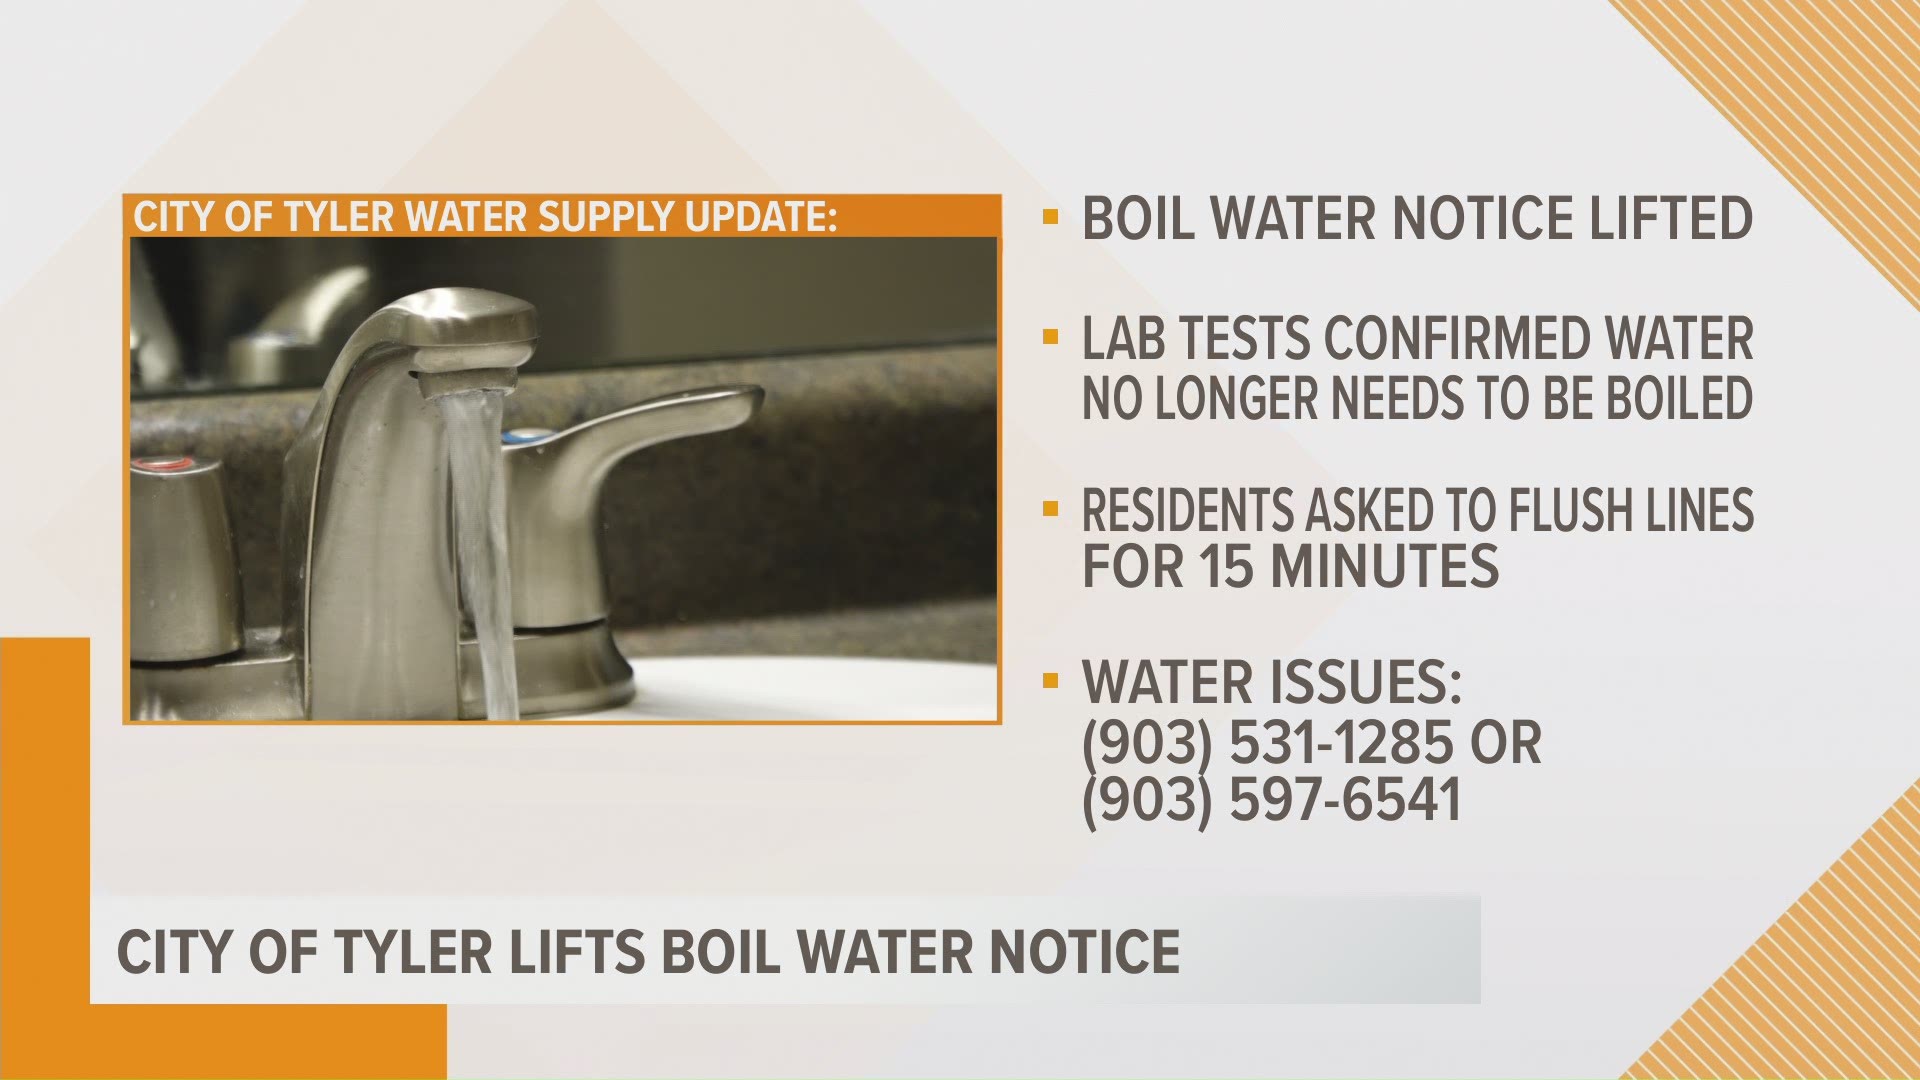 If you have questions concerning this matter, customers experiencing water loss should contact the Water Service Center at (903) 531-1285.